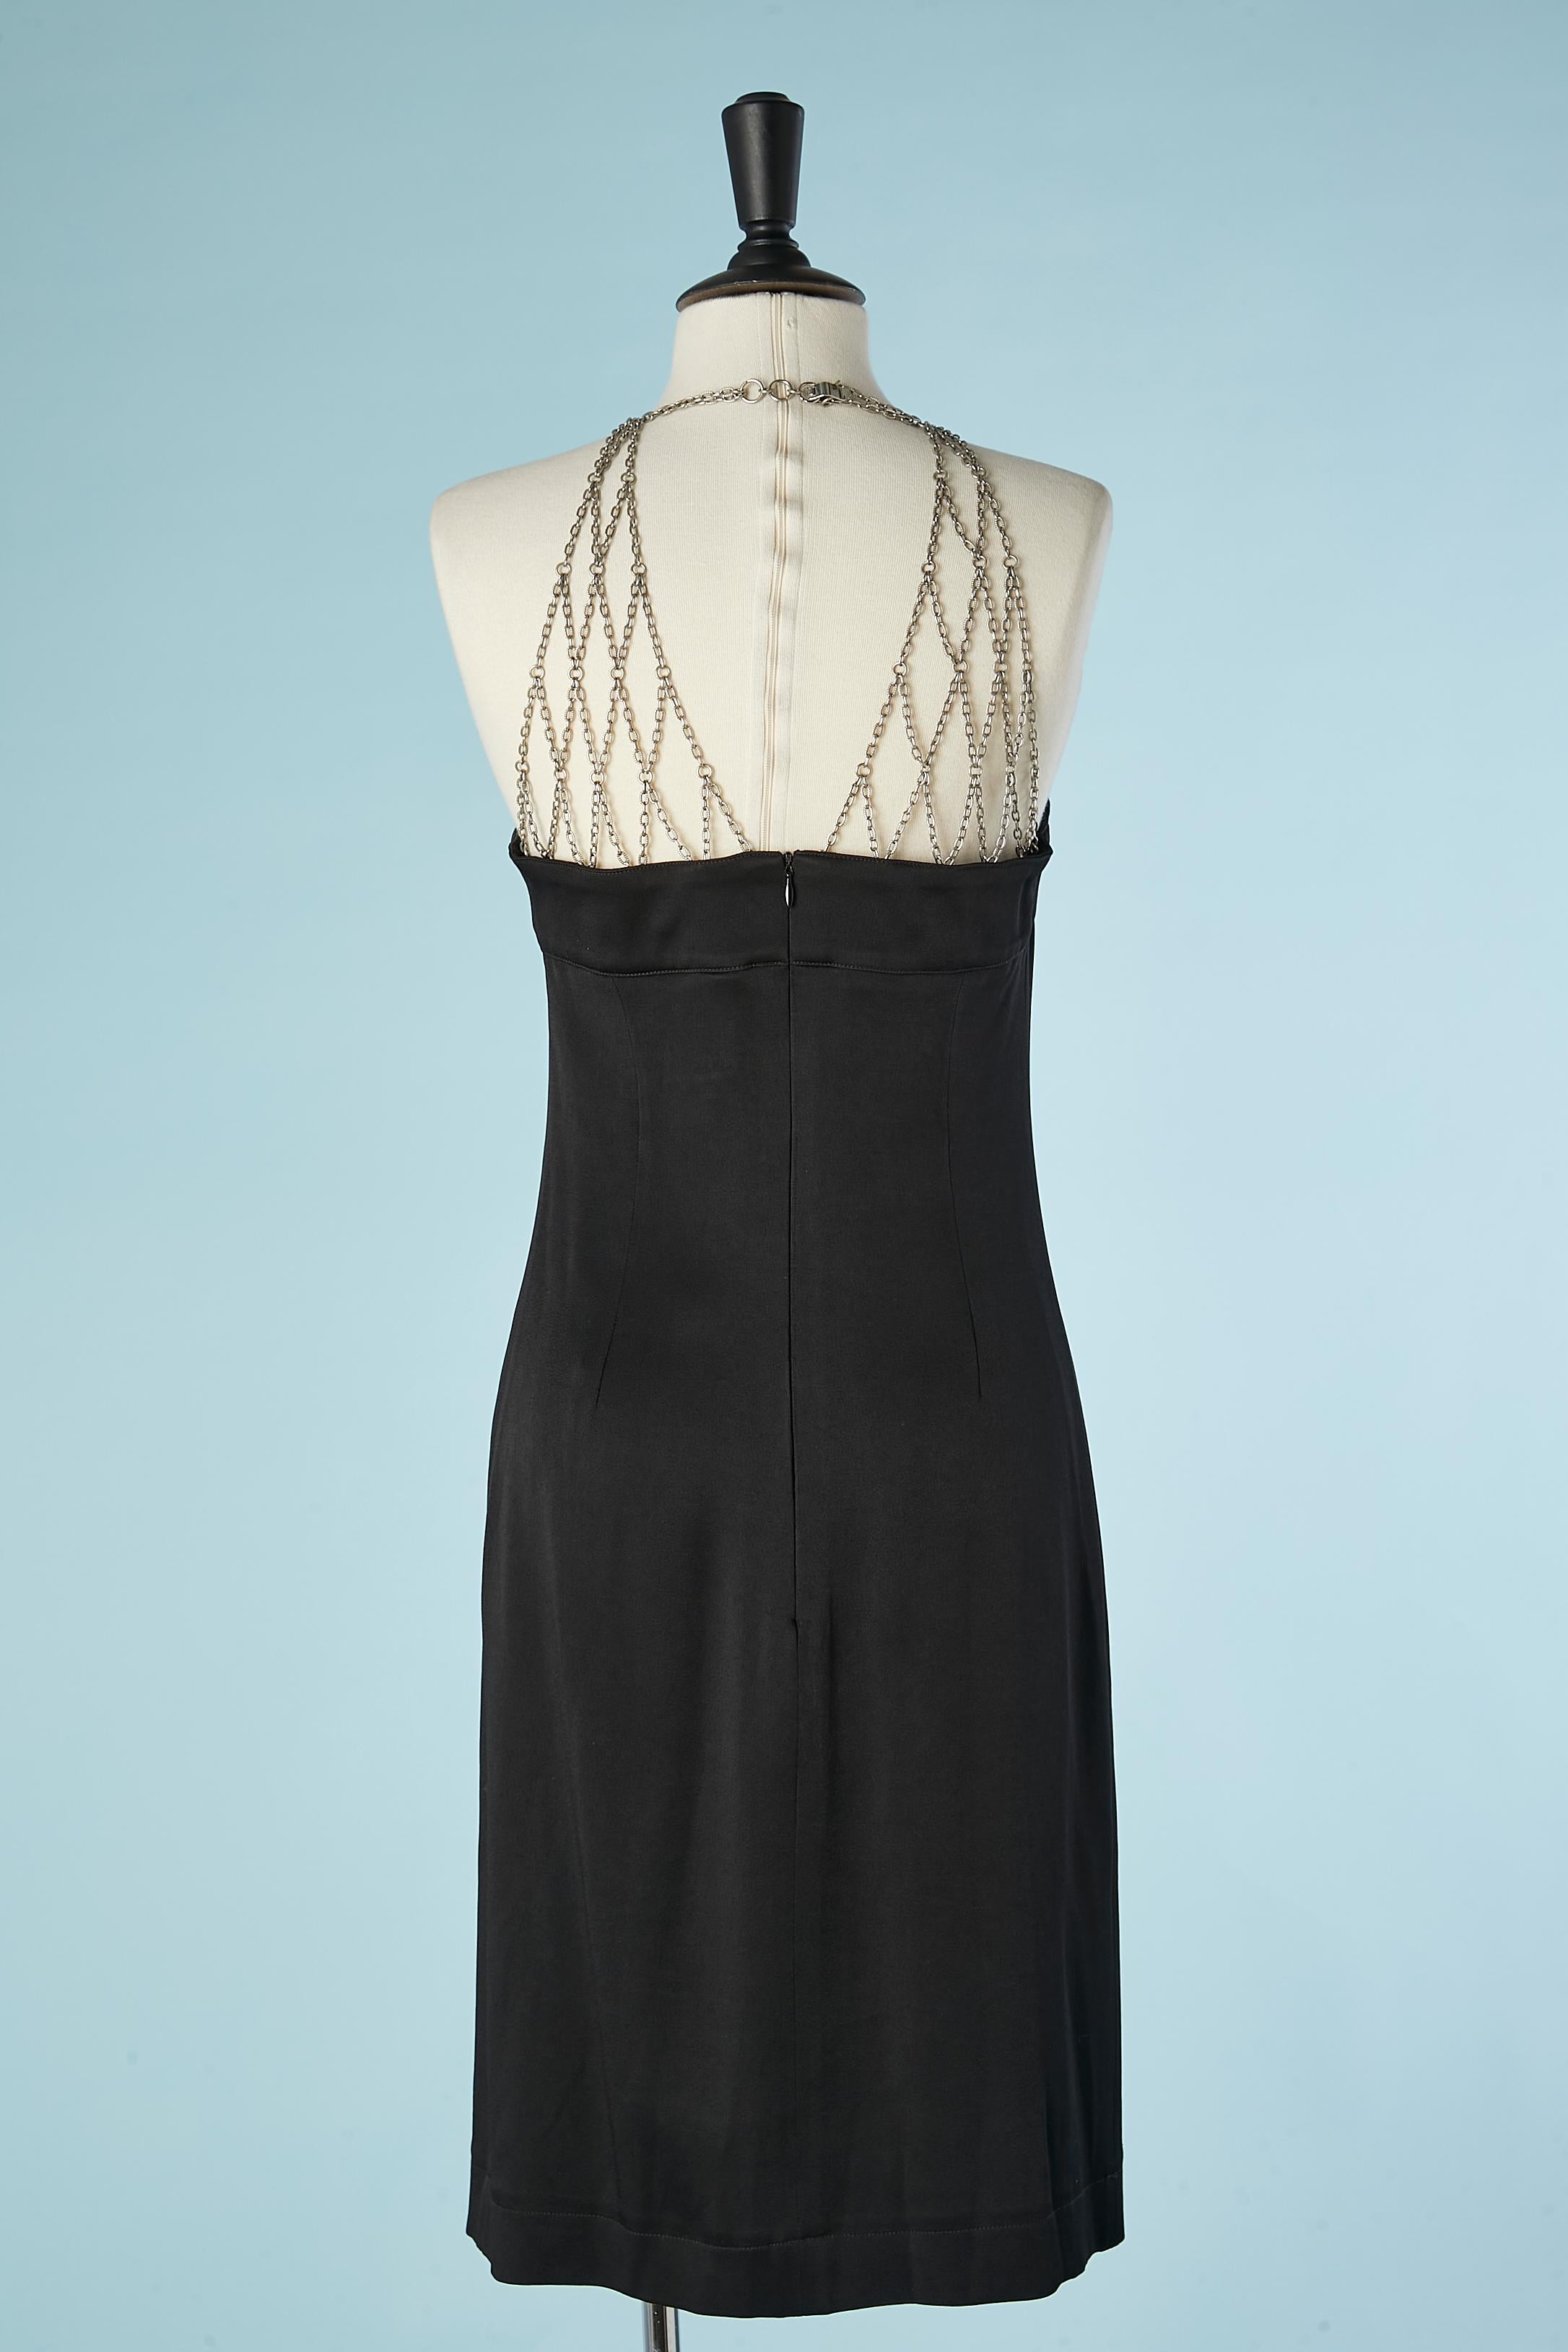 Black cocktail dress with chains on the neckline and back Paco Rabanne  1